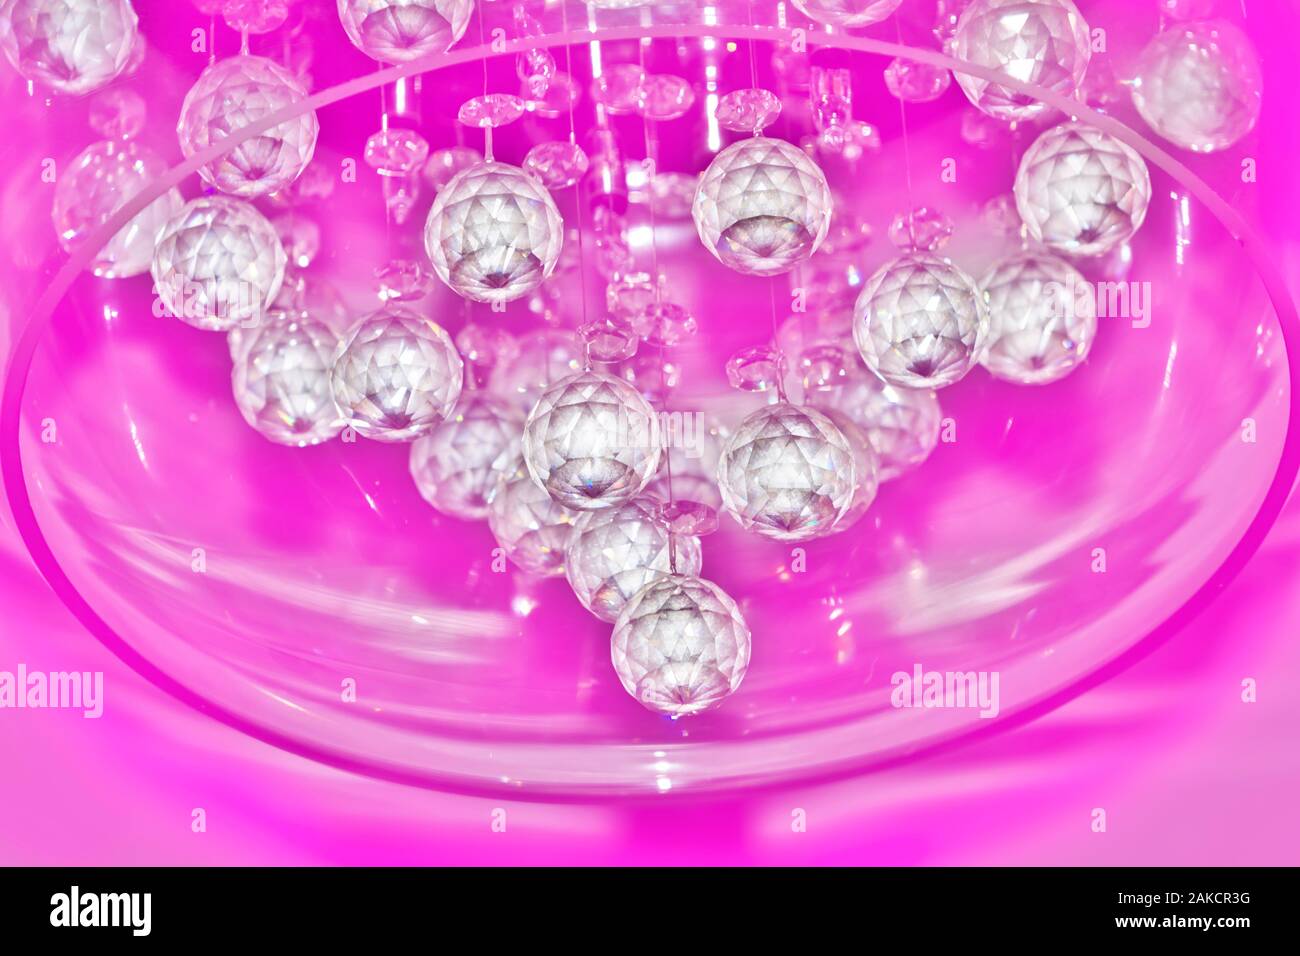 Kristallkugeln in Pink jelly Licht in Low Angle View close-up-Bild. Stockfoto